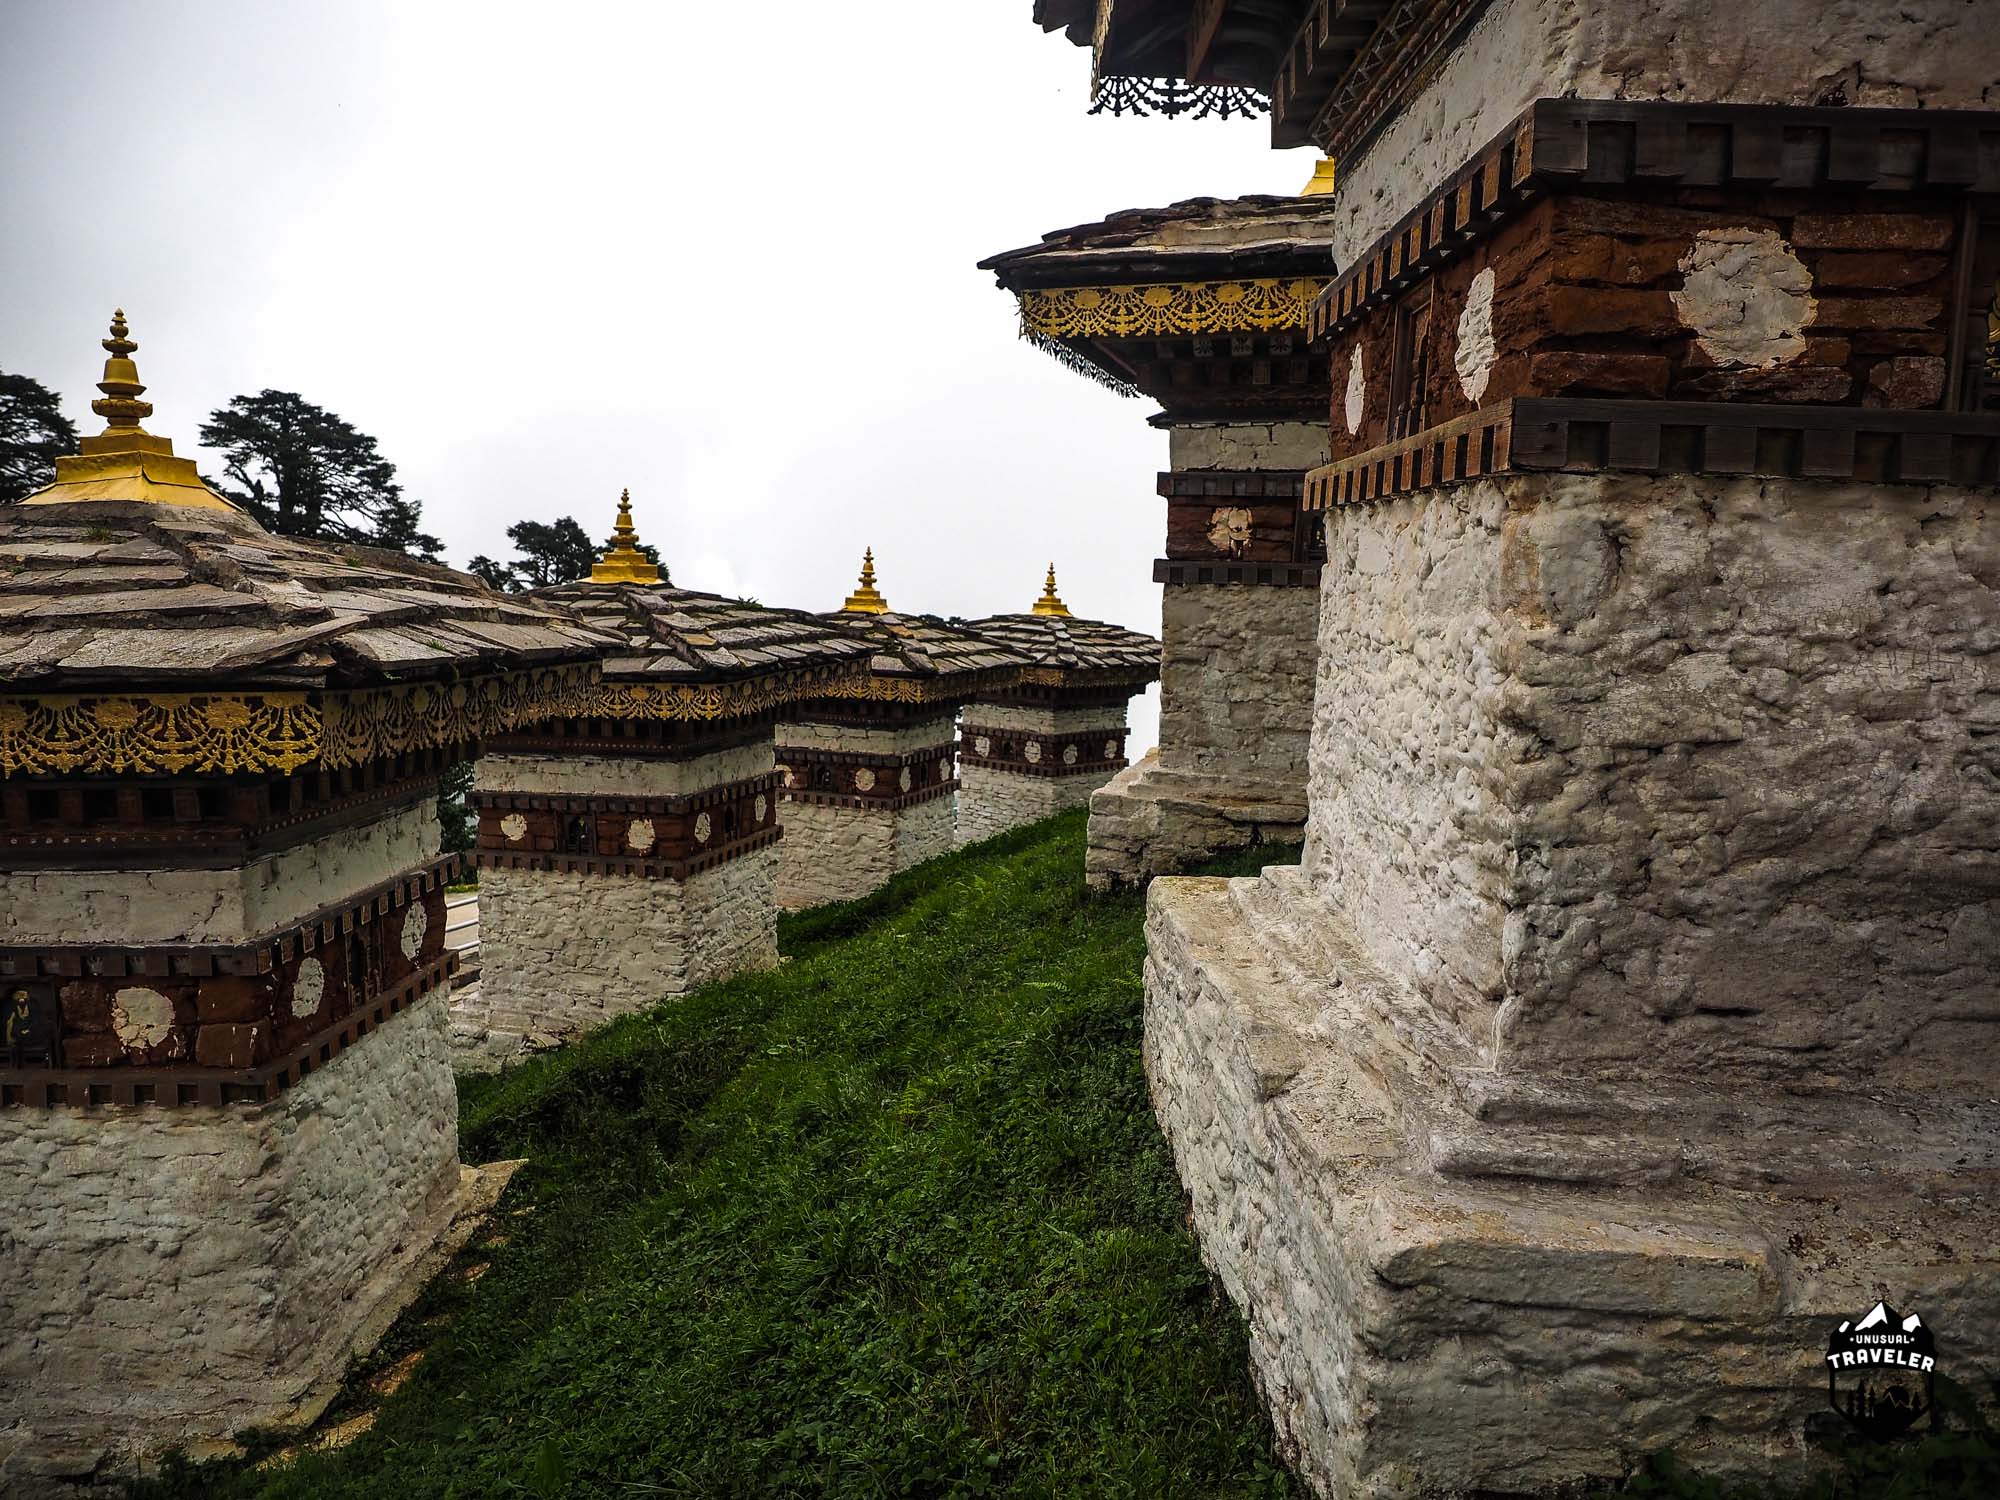 Would be easy to play hide and seek among the chortens, and some Indian kid was actually doing that in Bhutan